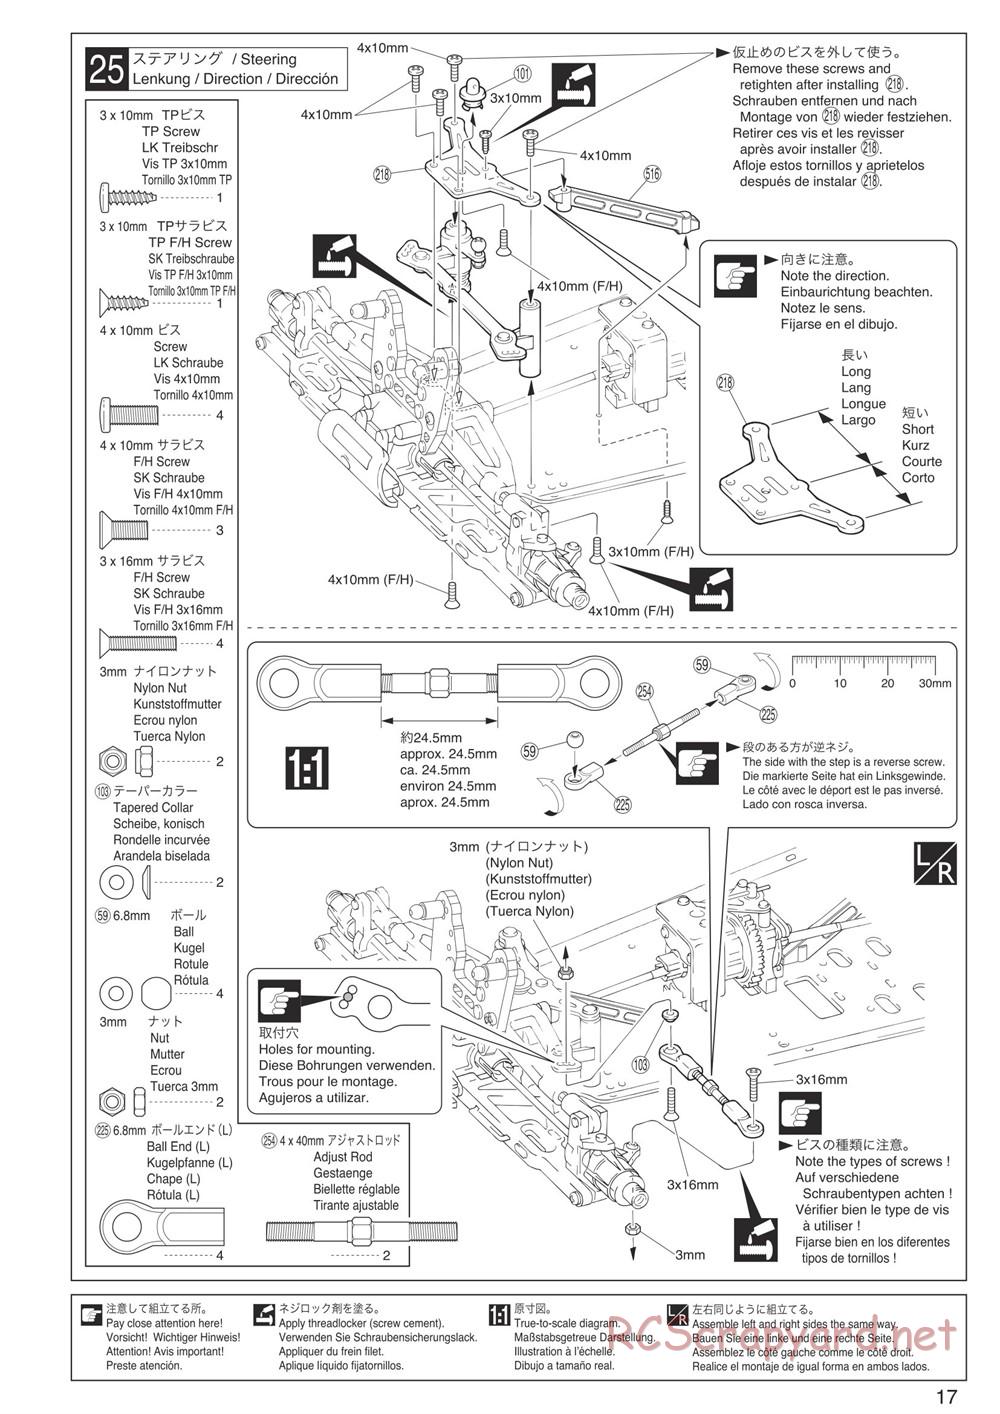 Kyosho - Inferno Neo 3.0 - Manual - Page 17